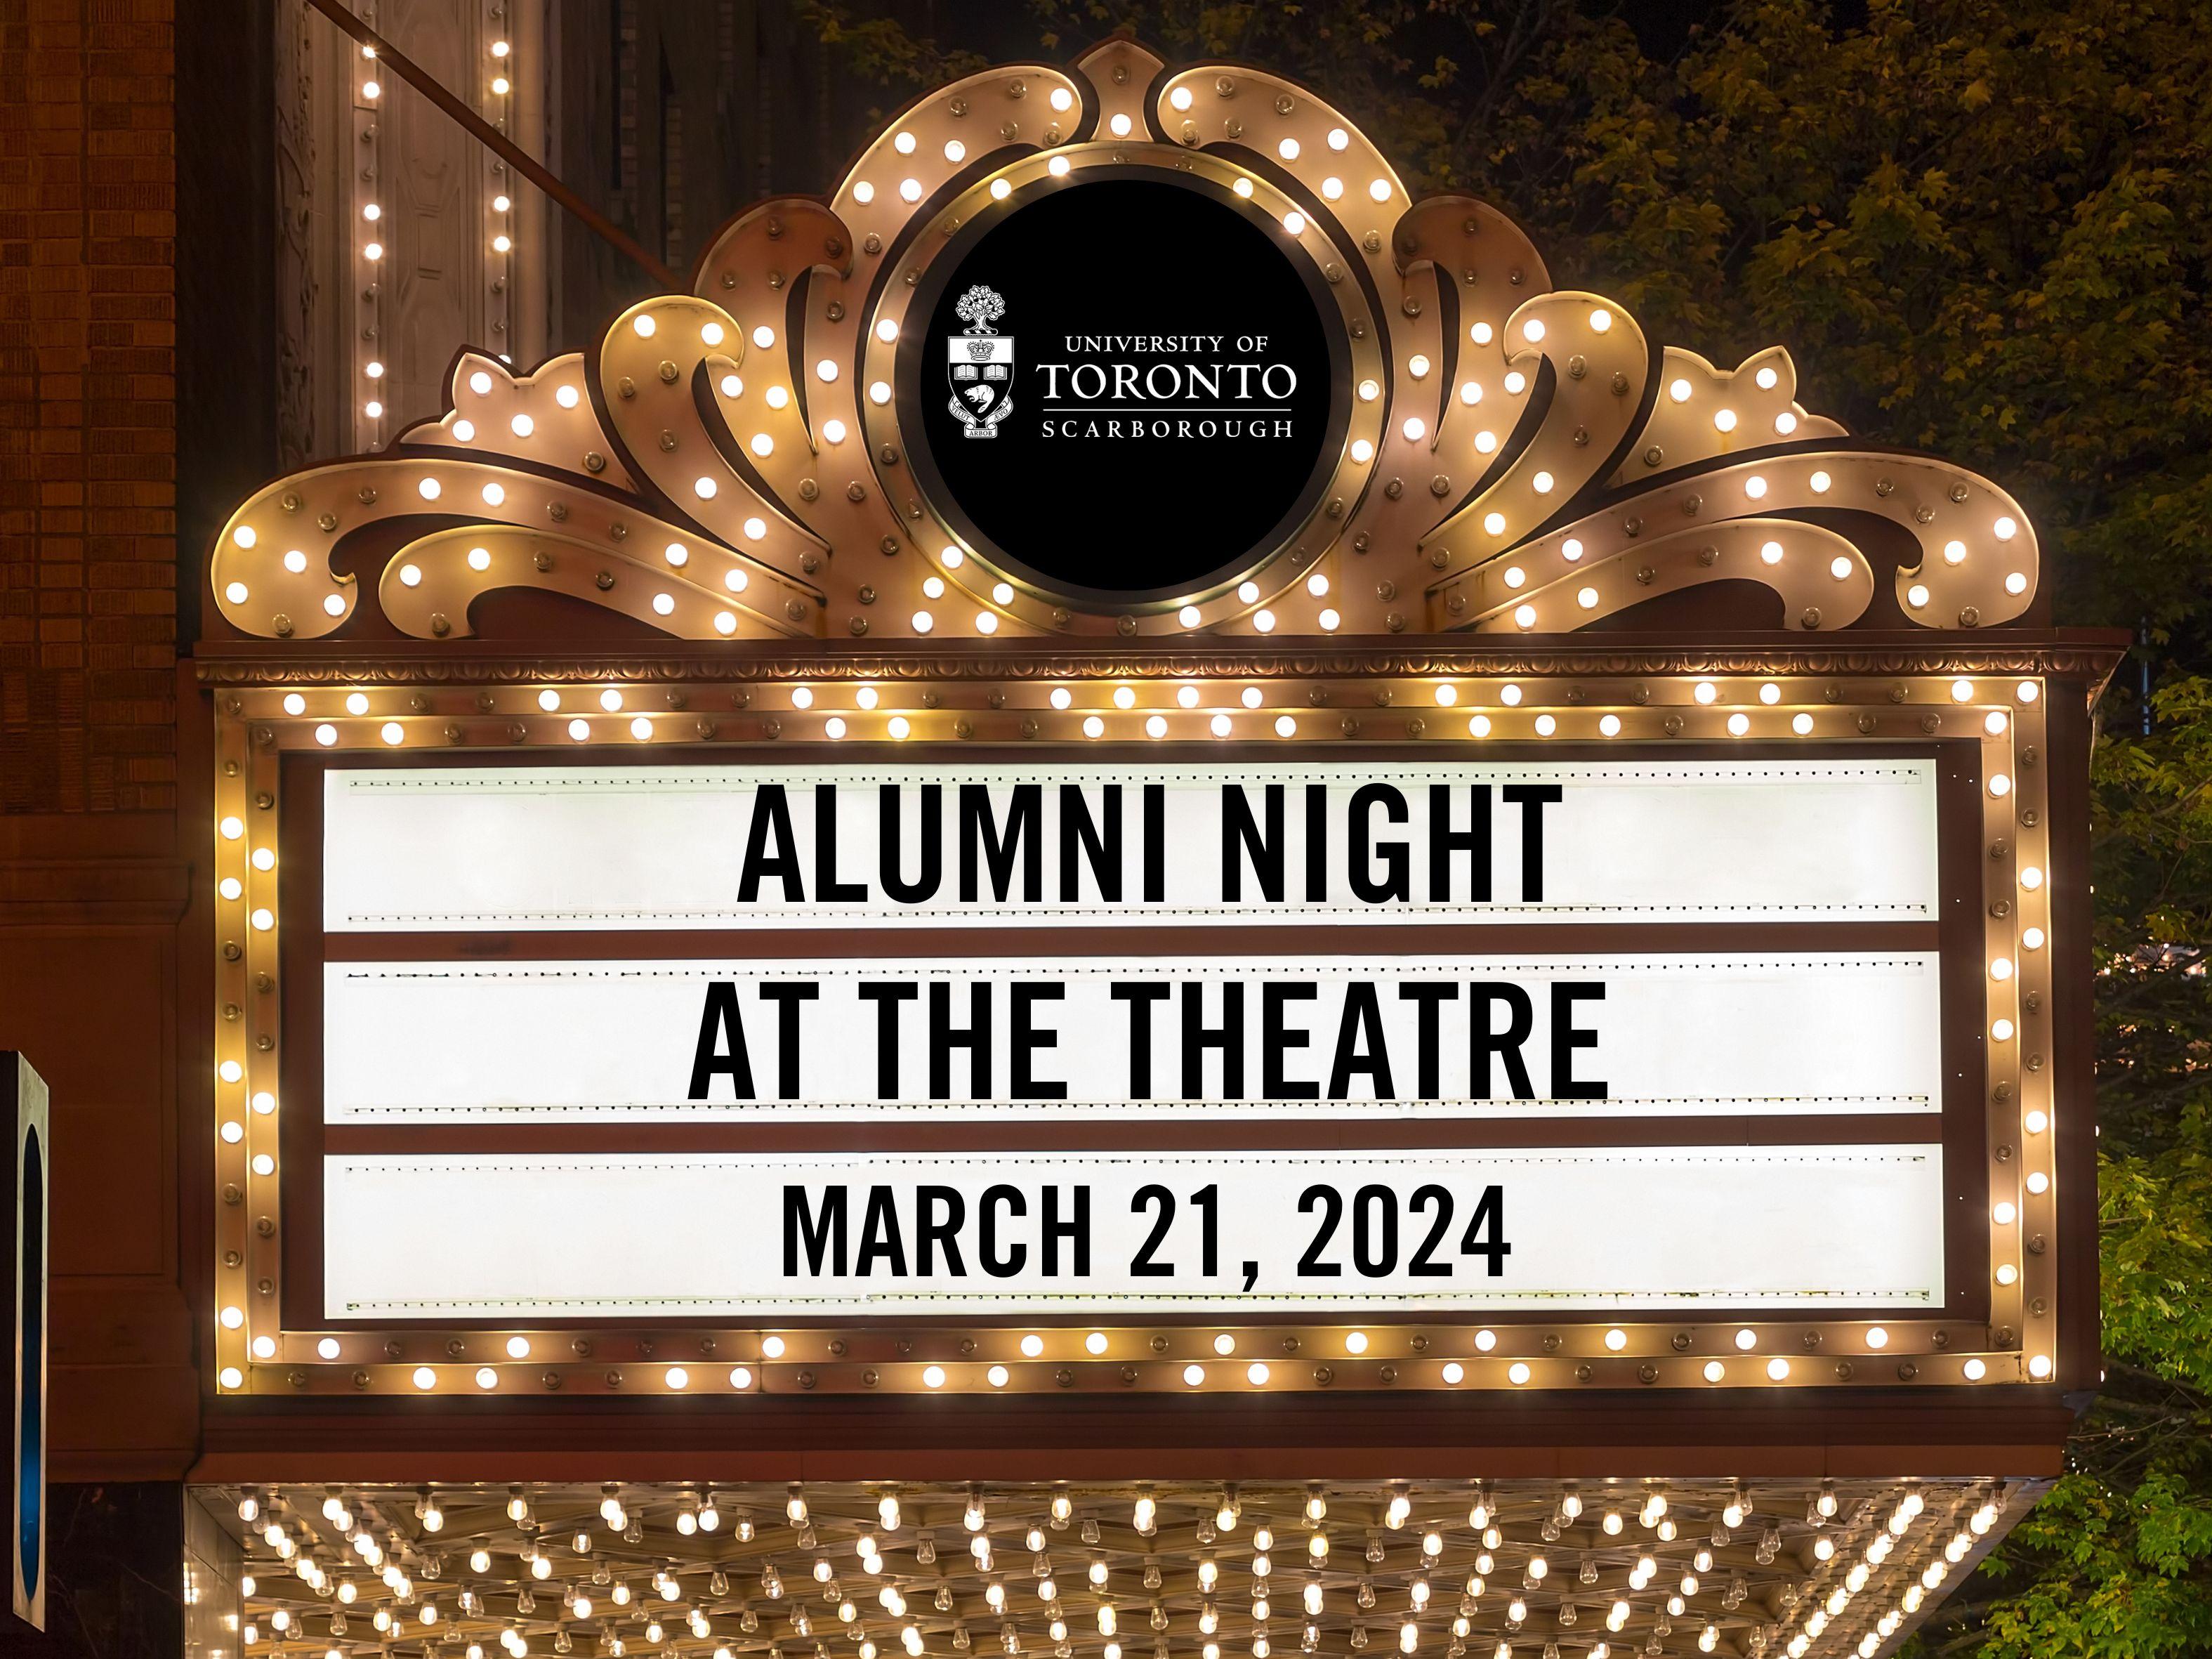 An illuminated theatre marquee sign at night with the University of Toronto Scarborough logo at the top. The sign announces 'ALUMNI NIGHT AT THE THEATRE MARCH 21, 2024' in bold, capital letters. The sign is adorned with numerous light bulbs, providing a classic and festive atmosphere.